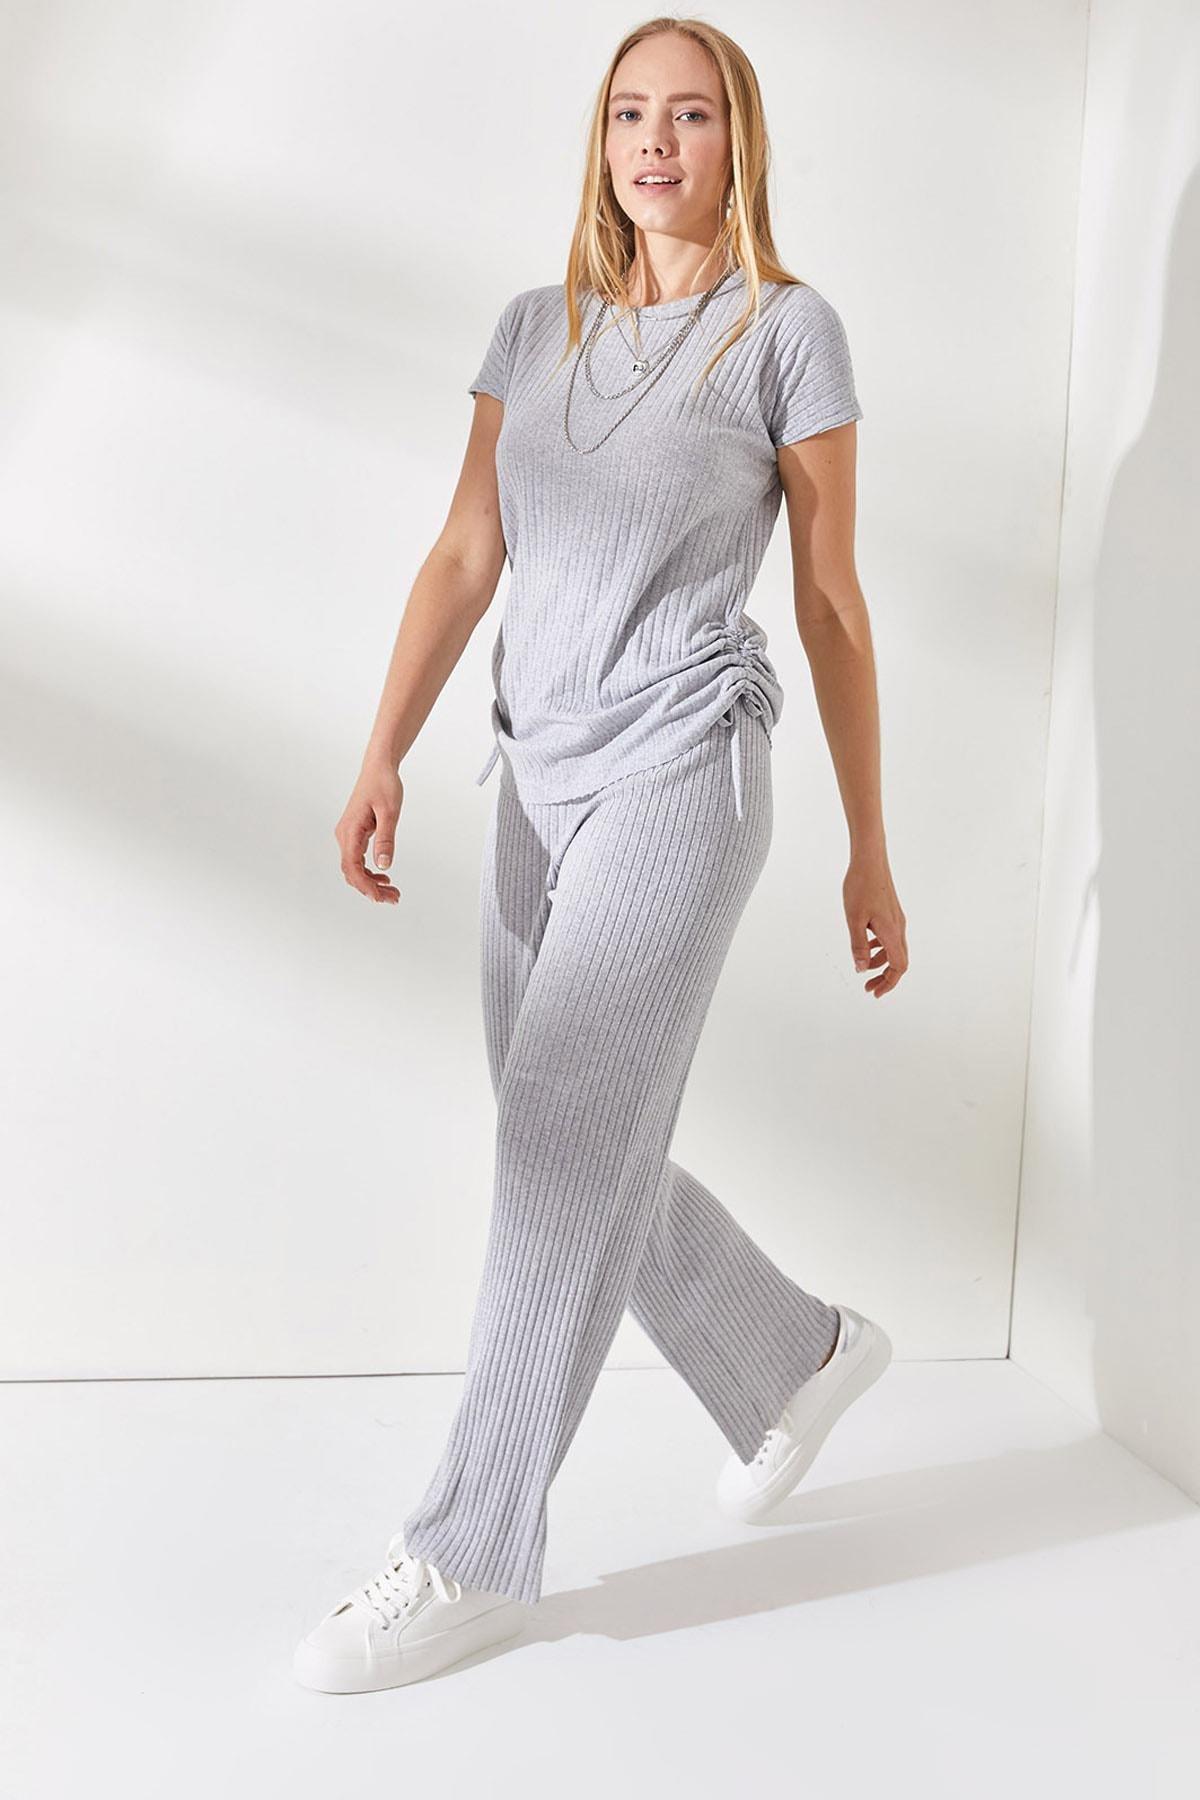 Olalook - Grey Shirred Sides Blouse Palazzo Pants Suit